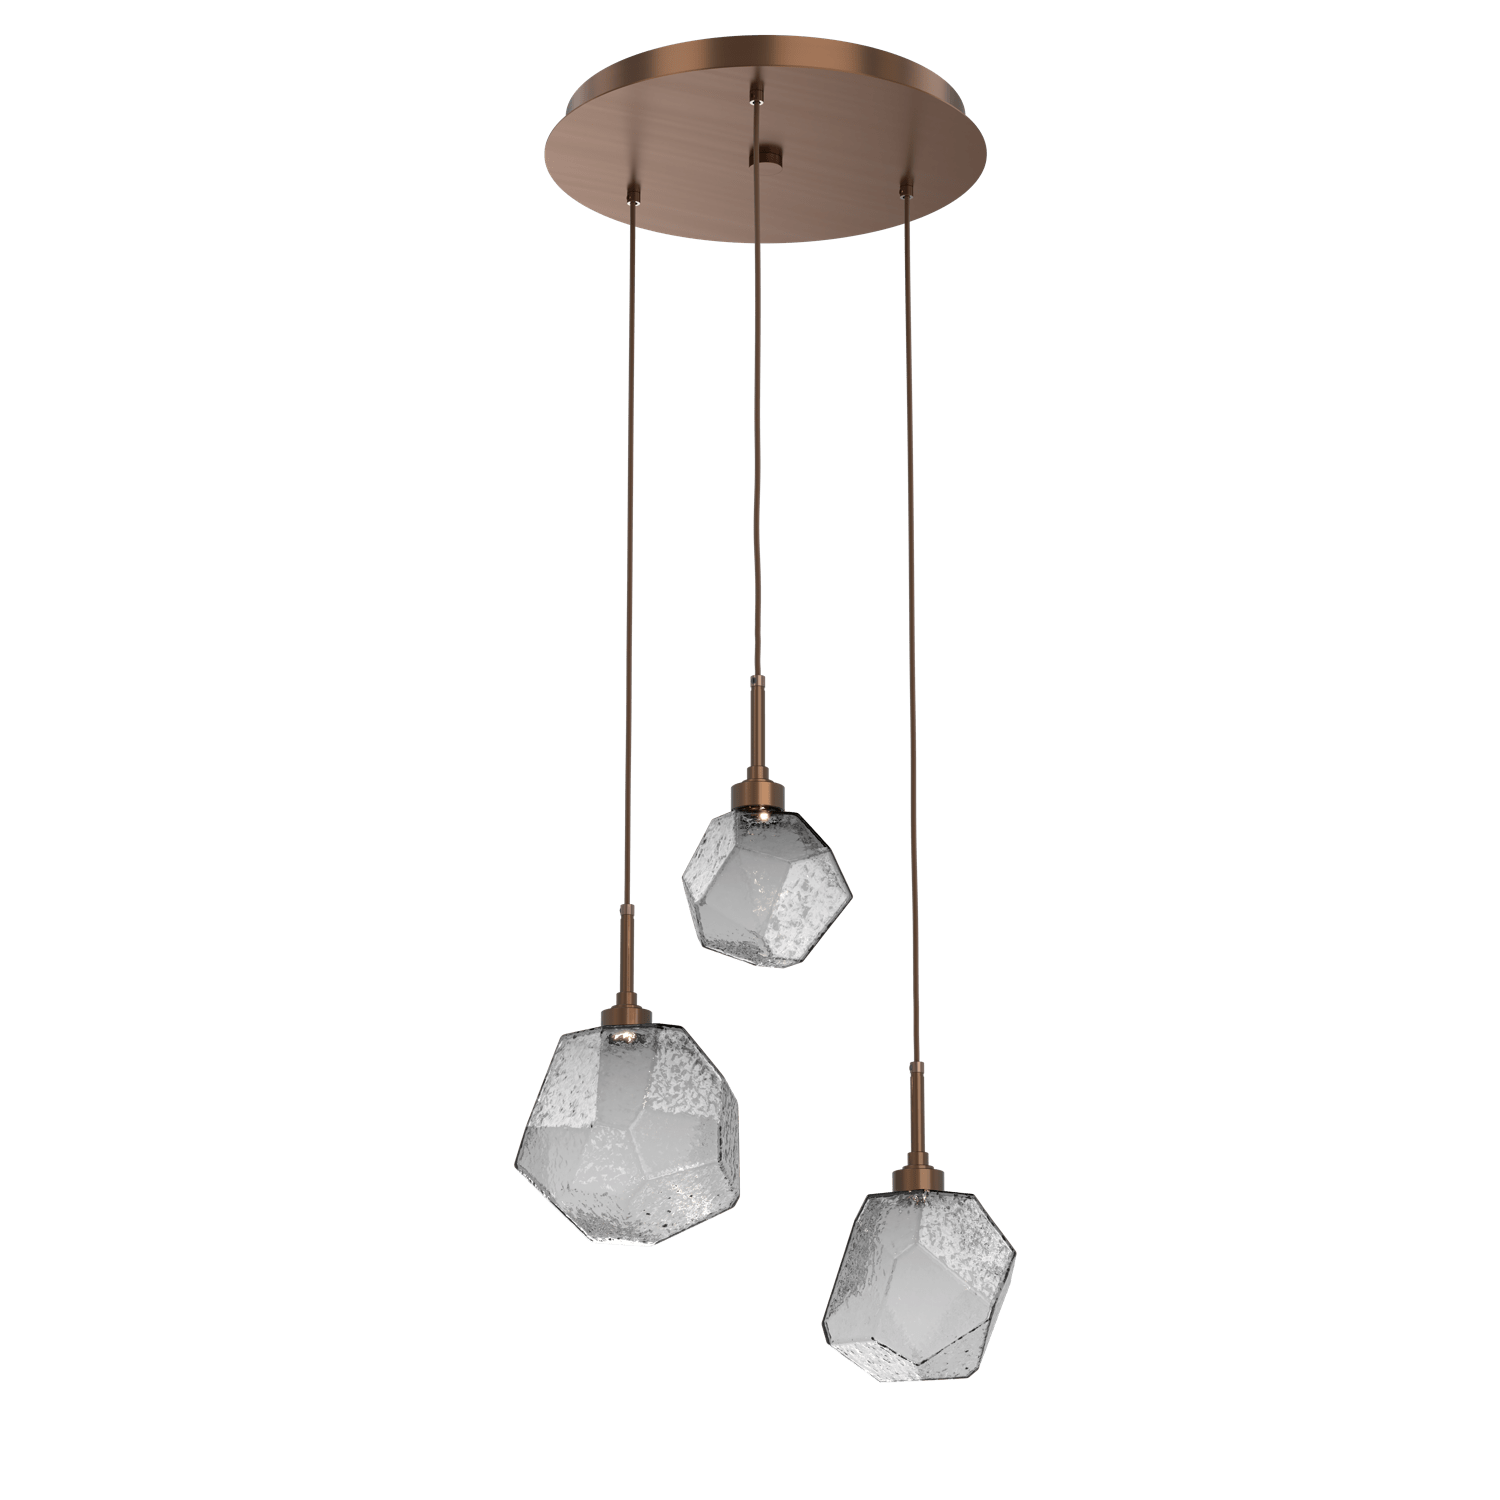 CHB0039-03-RB-S-Hammerton-Studio-Gem-3-light-round-pendant-chandelier-with-oil-rubbed-bronze-finish-and-smoke-blown-glass-shades-and-LED-lamping